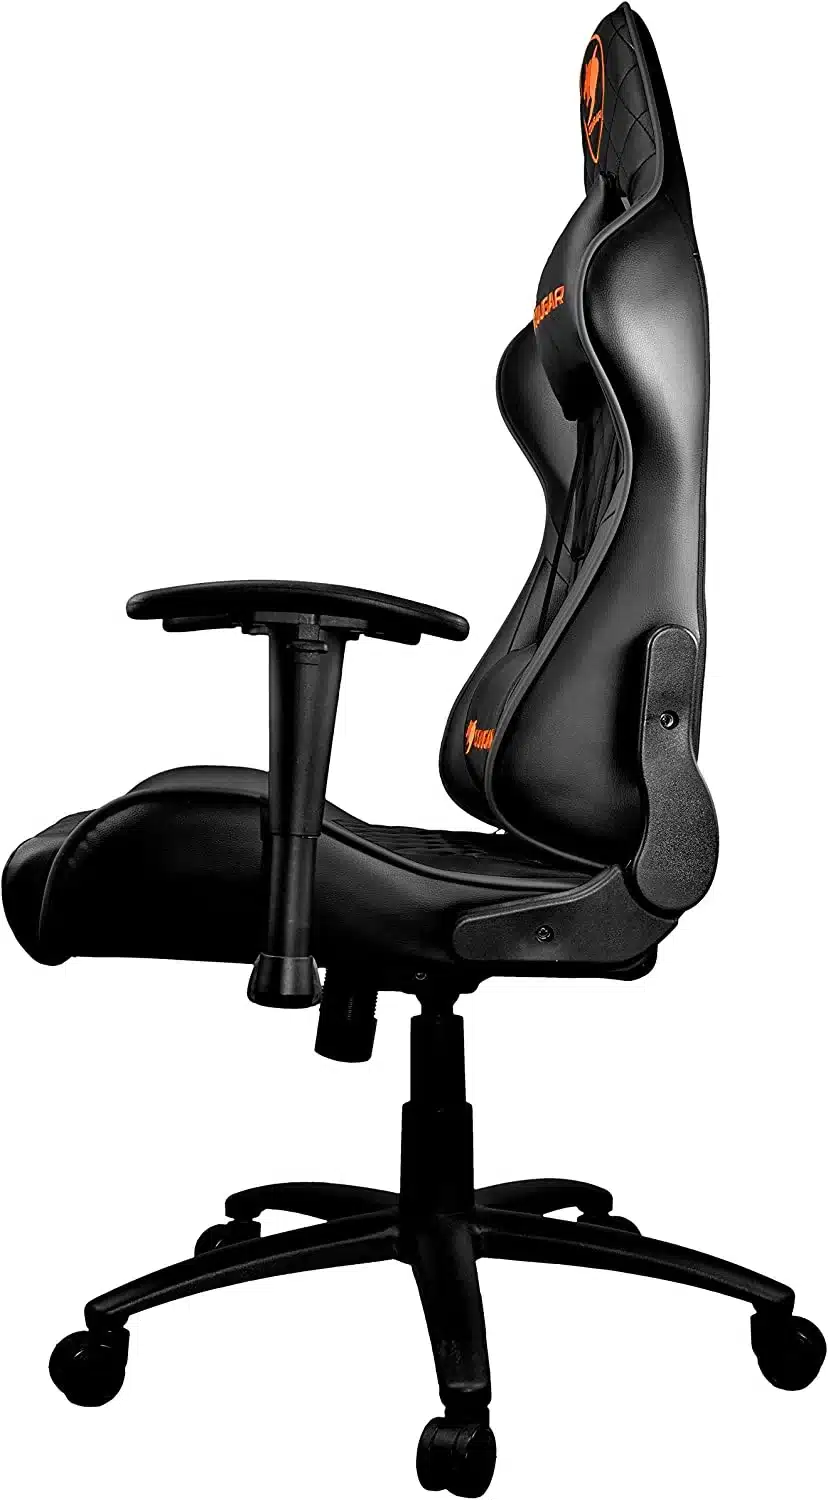 COUGAR ARMOR Gaming Chair